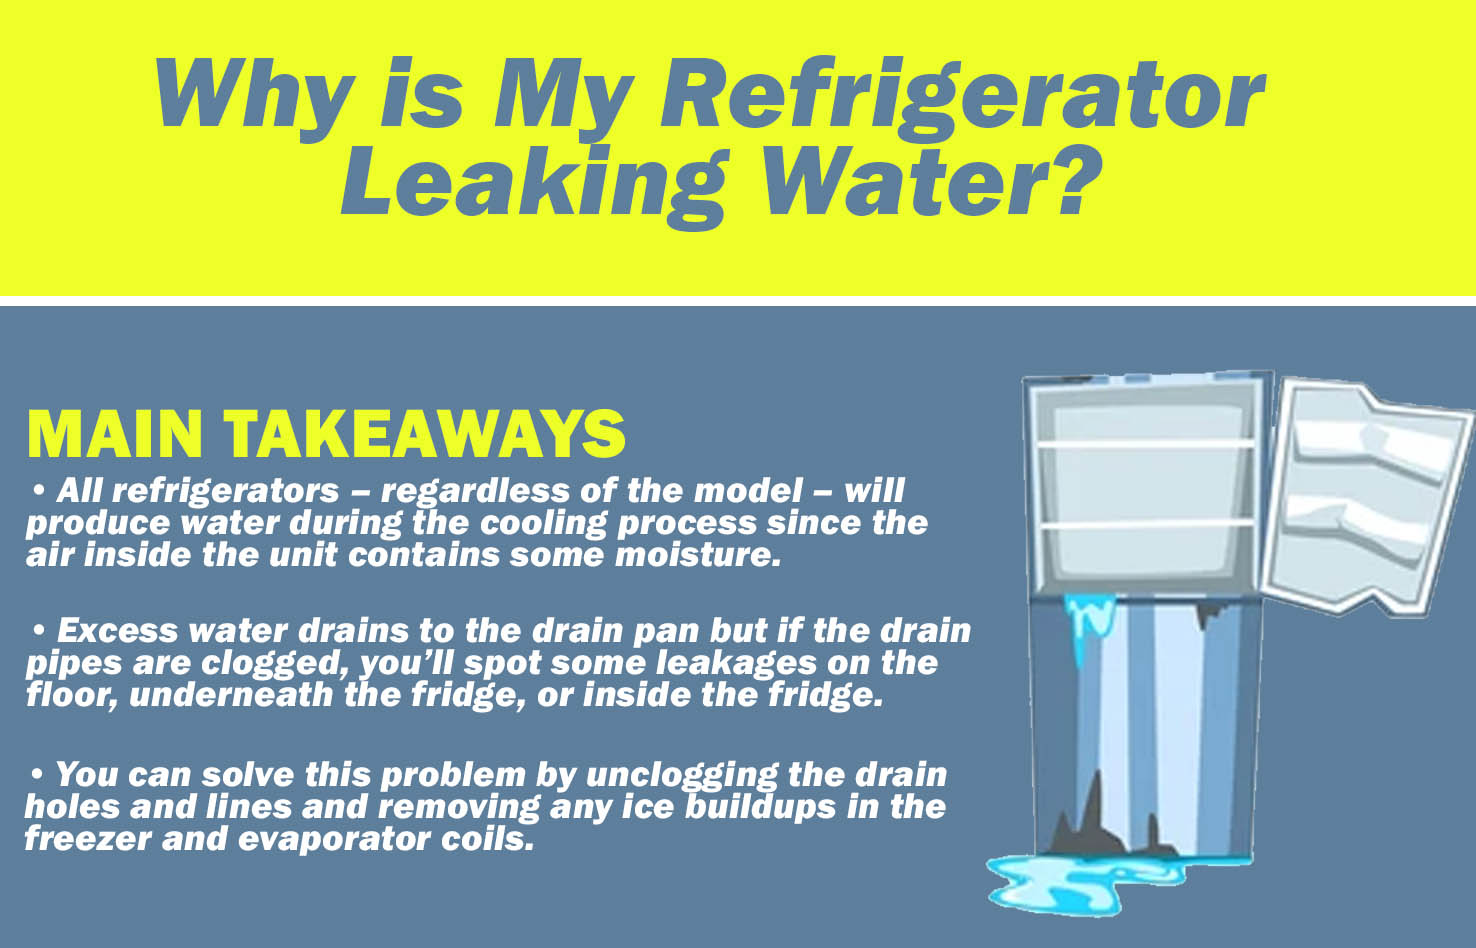 Why Is My Refrigerator Leaking Water? Summary